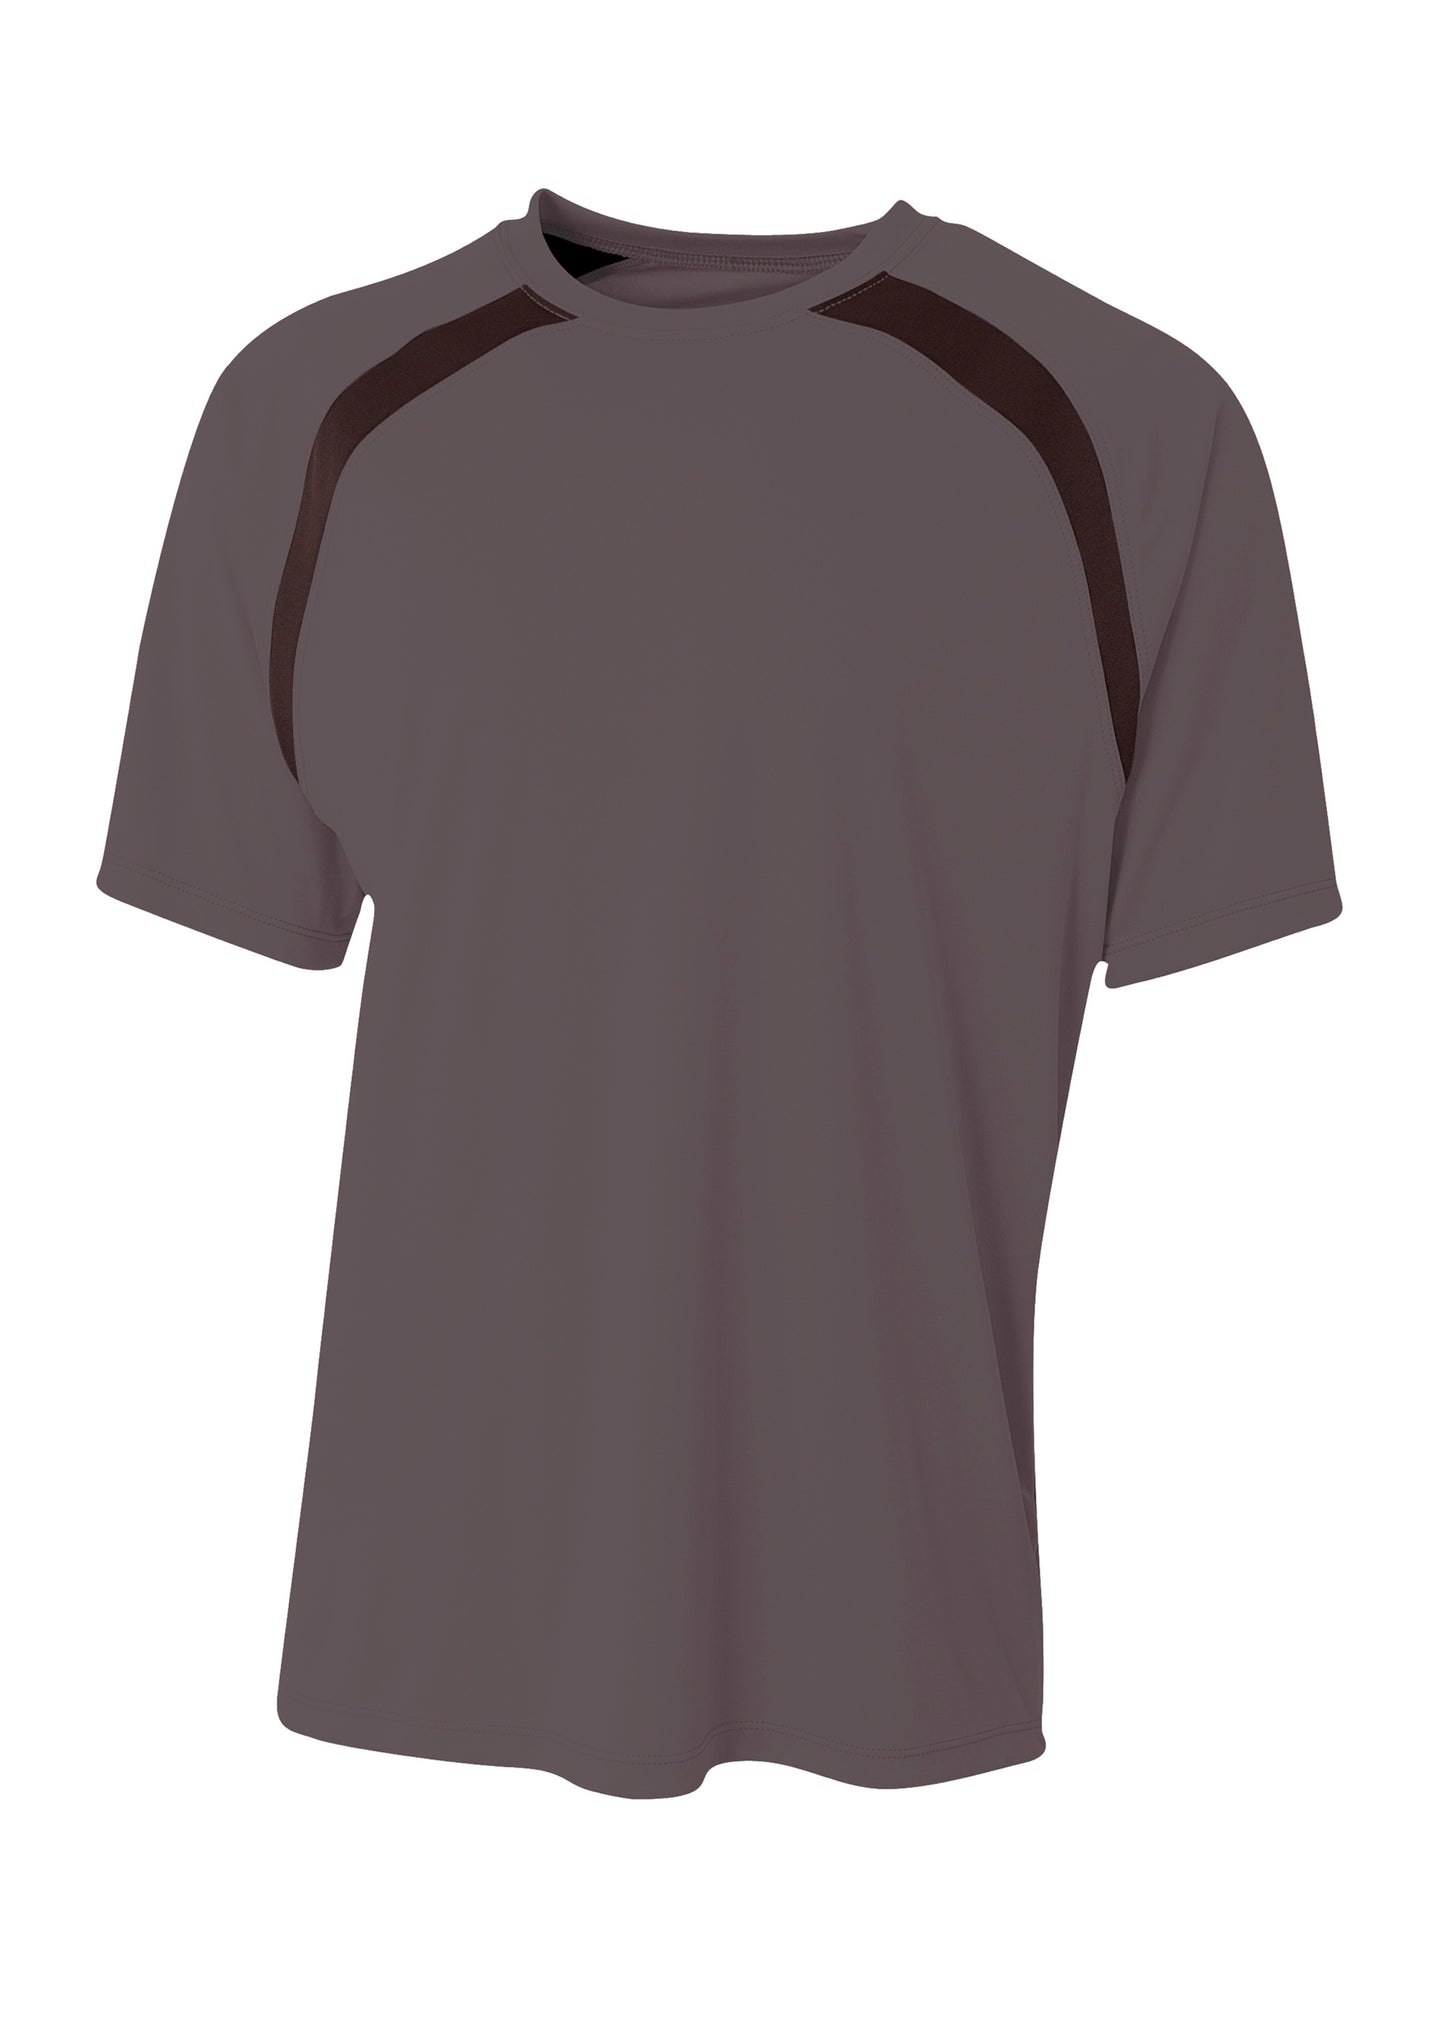 Photo of A4 SHIRTS NB3001  color  GRAPHITE/BLACK